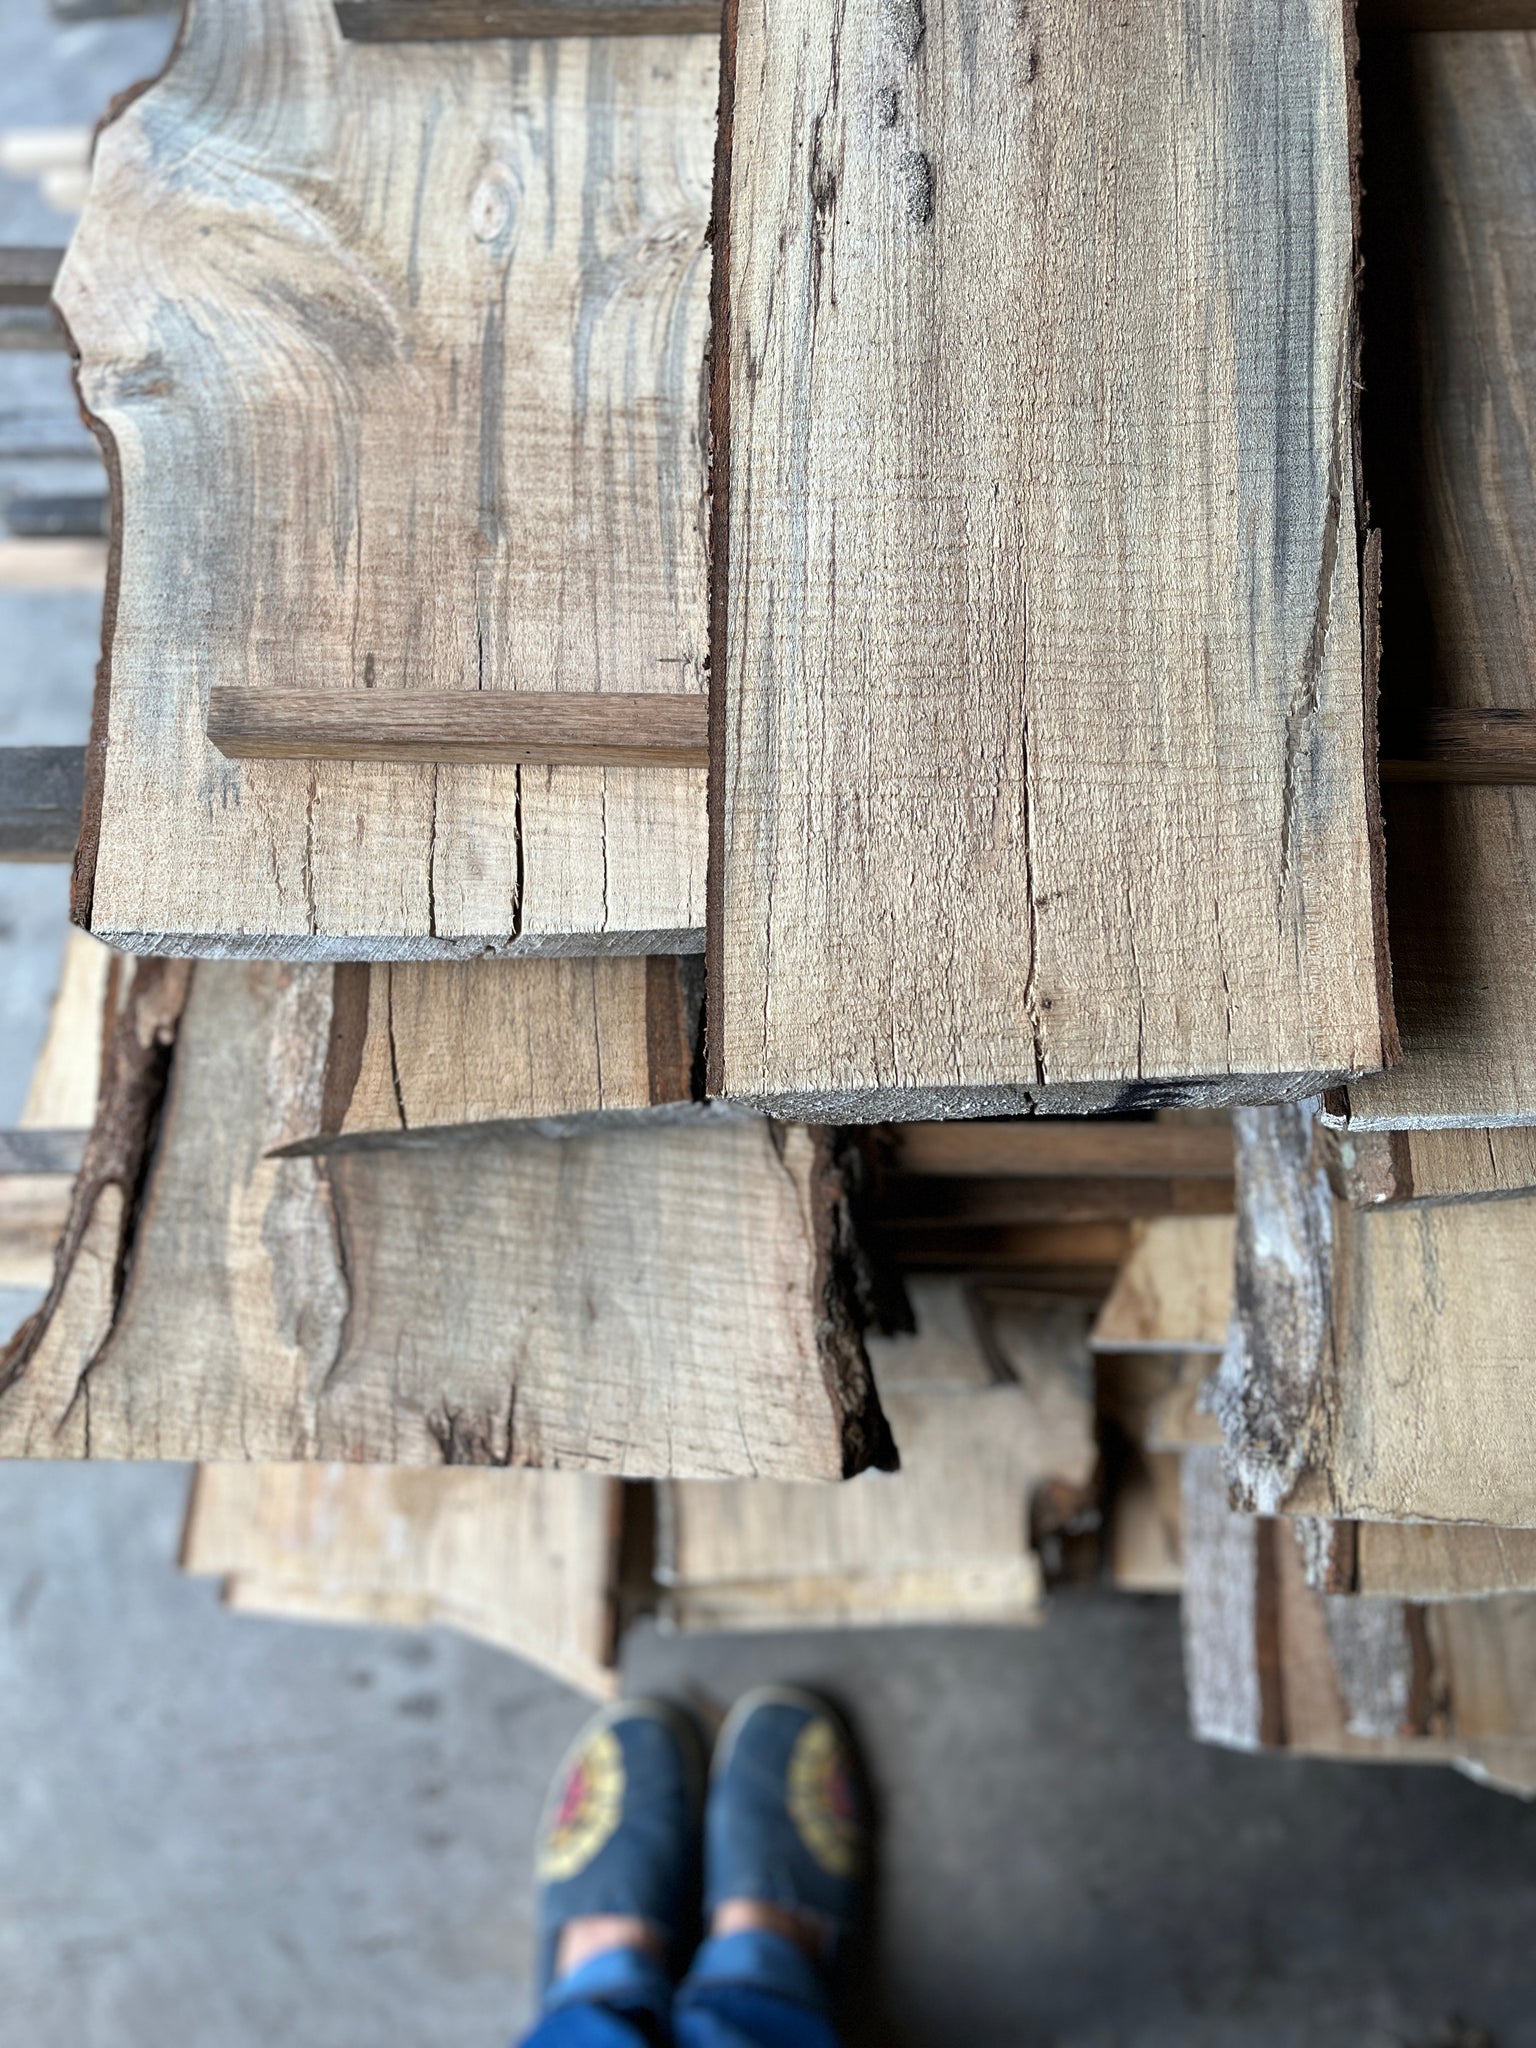 Find High-Grade wholesale birch logs For Lumber and Sawing - .